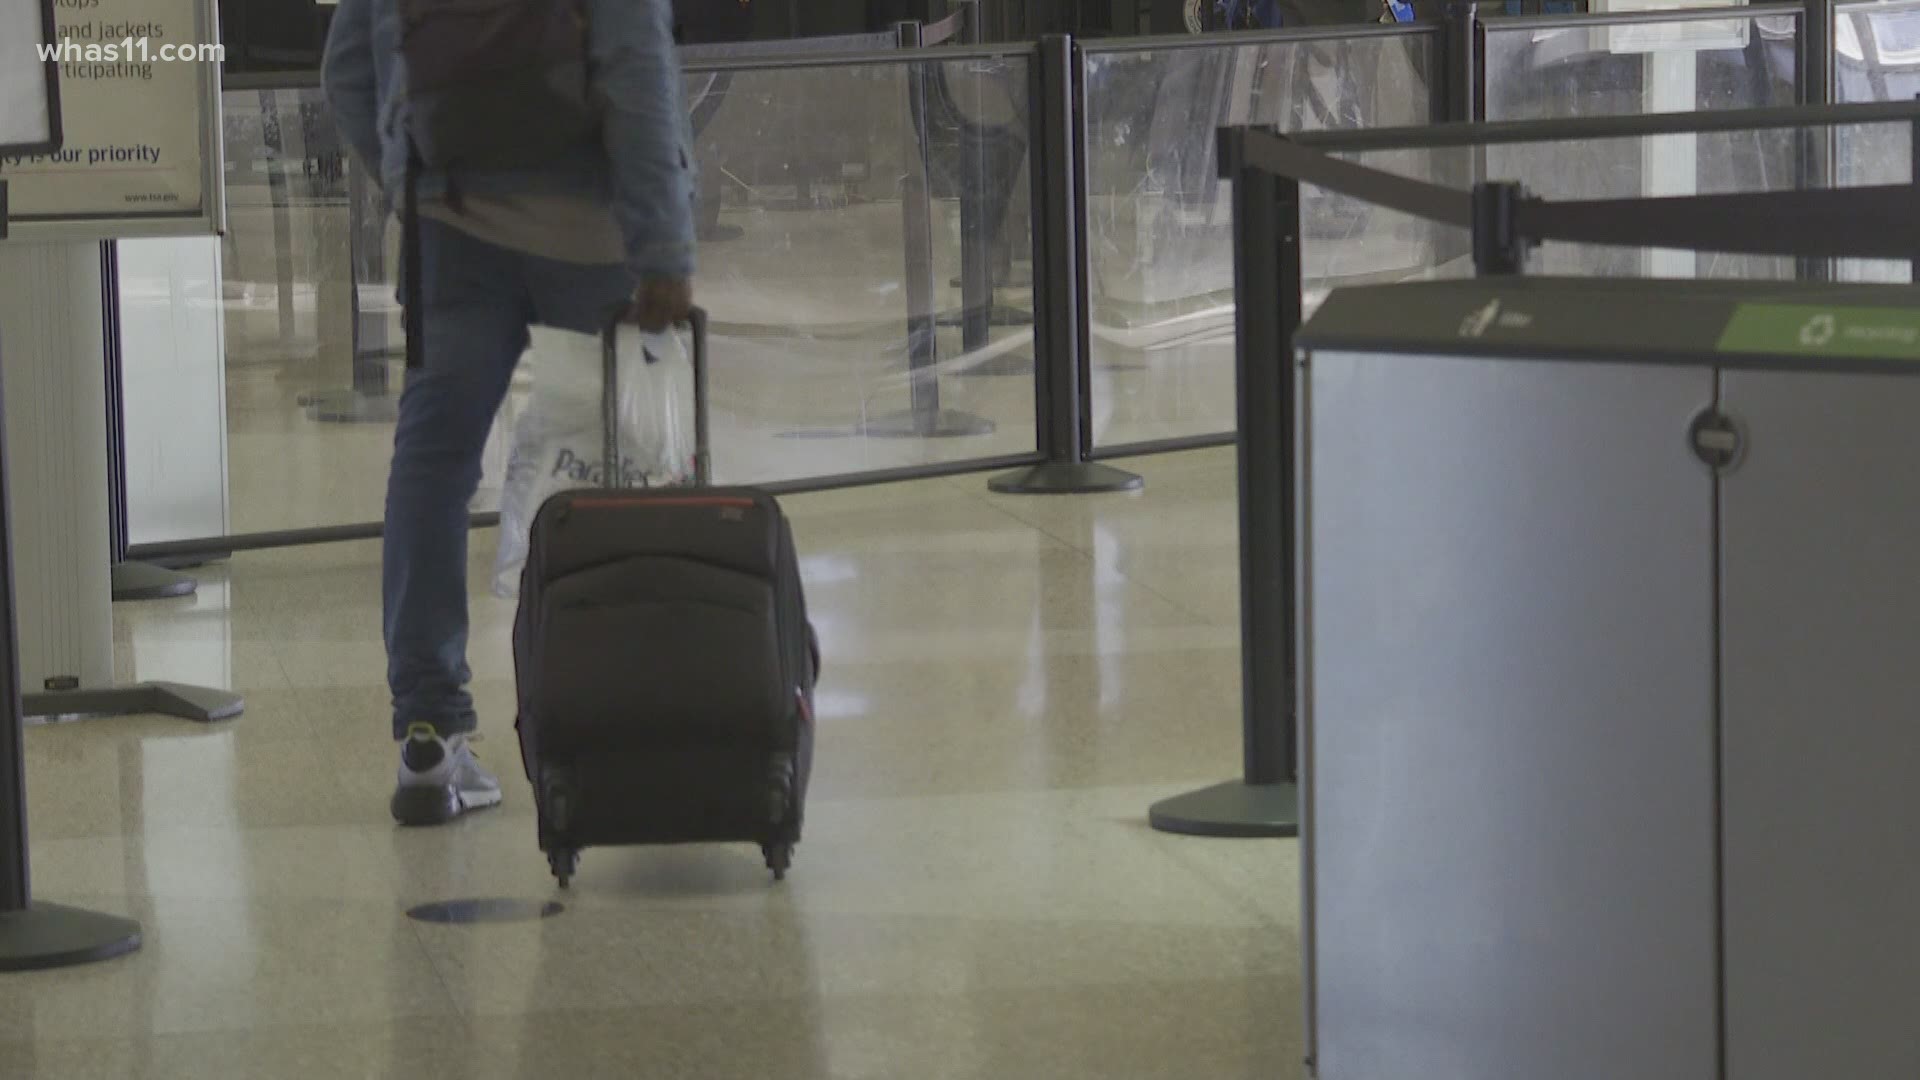 Louisville International Airport improves parking experience | whas11.com